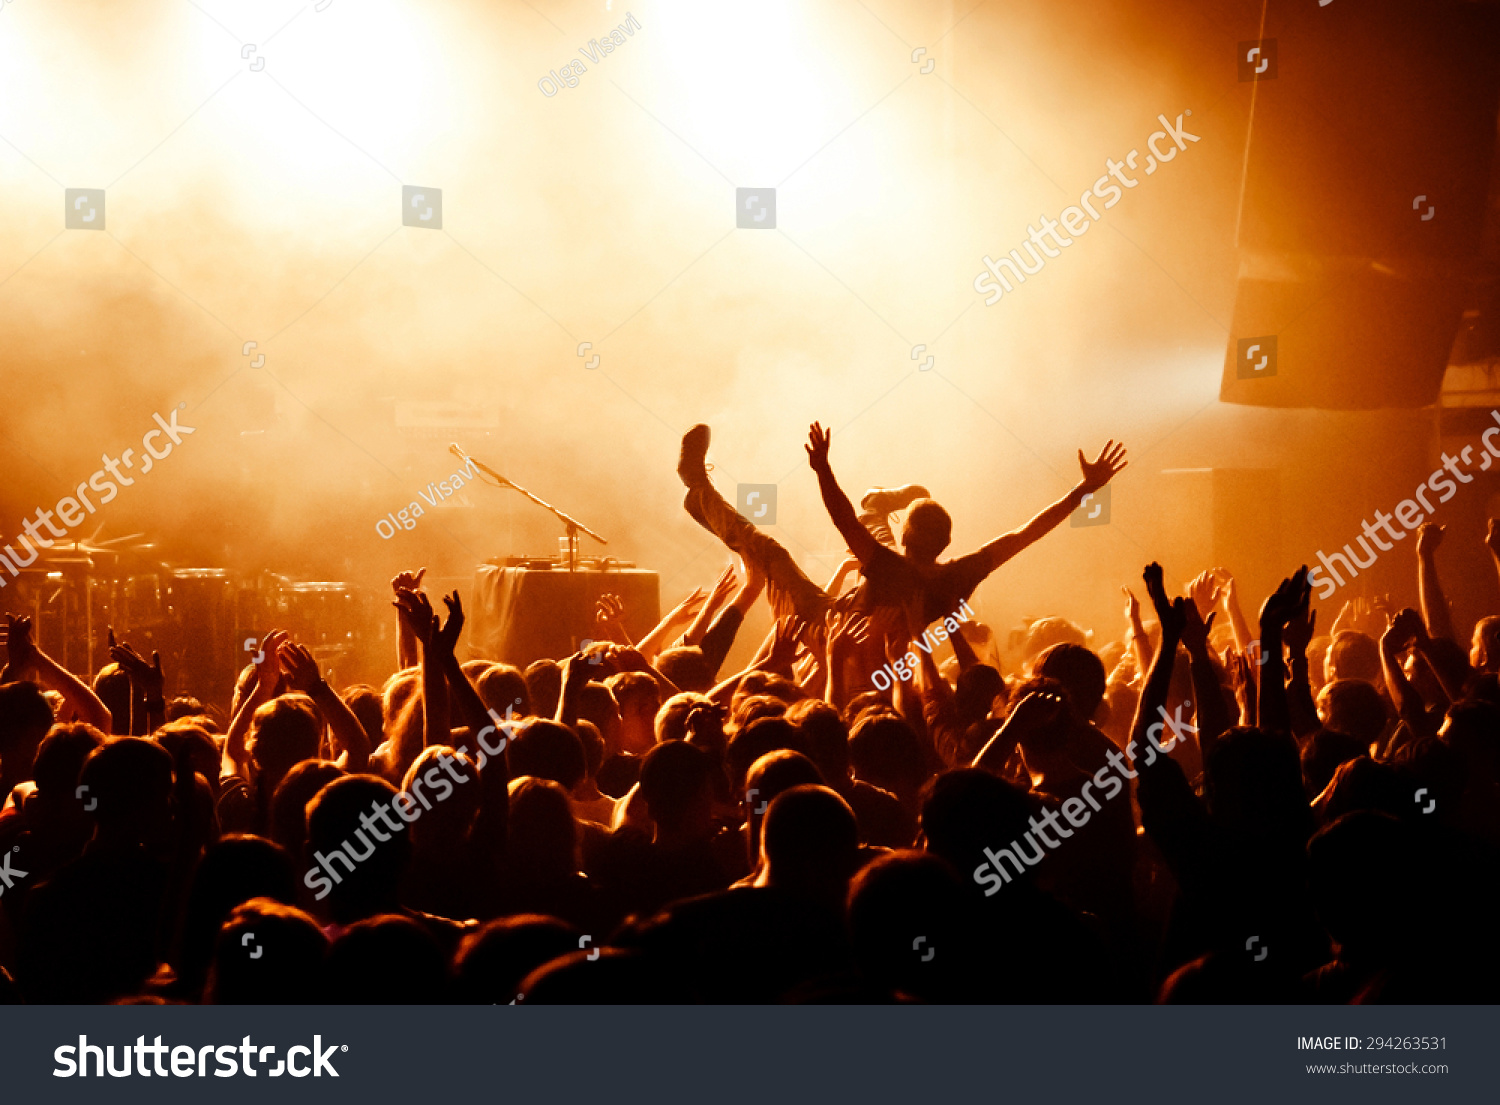 Crowd Surfing During Musical Performance Stock Photo (Edit Now) 294263531